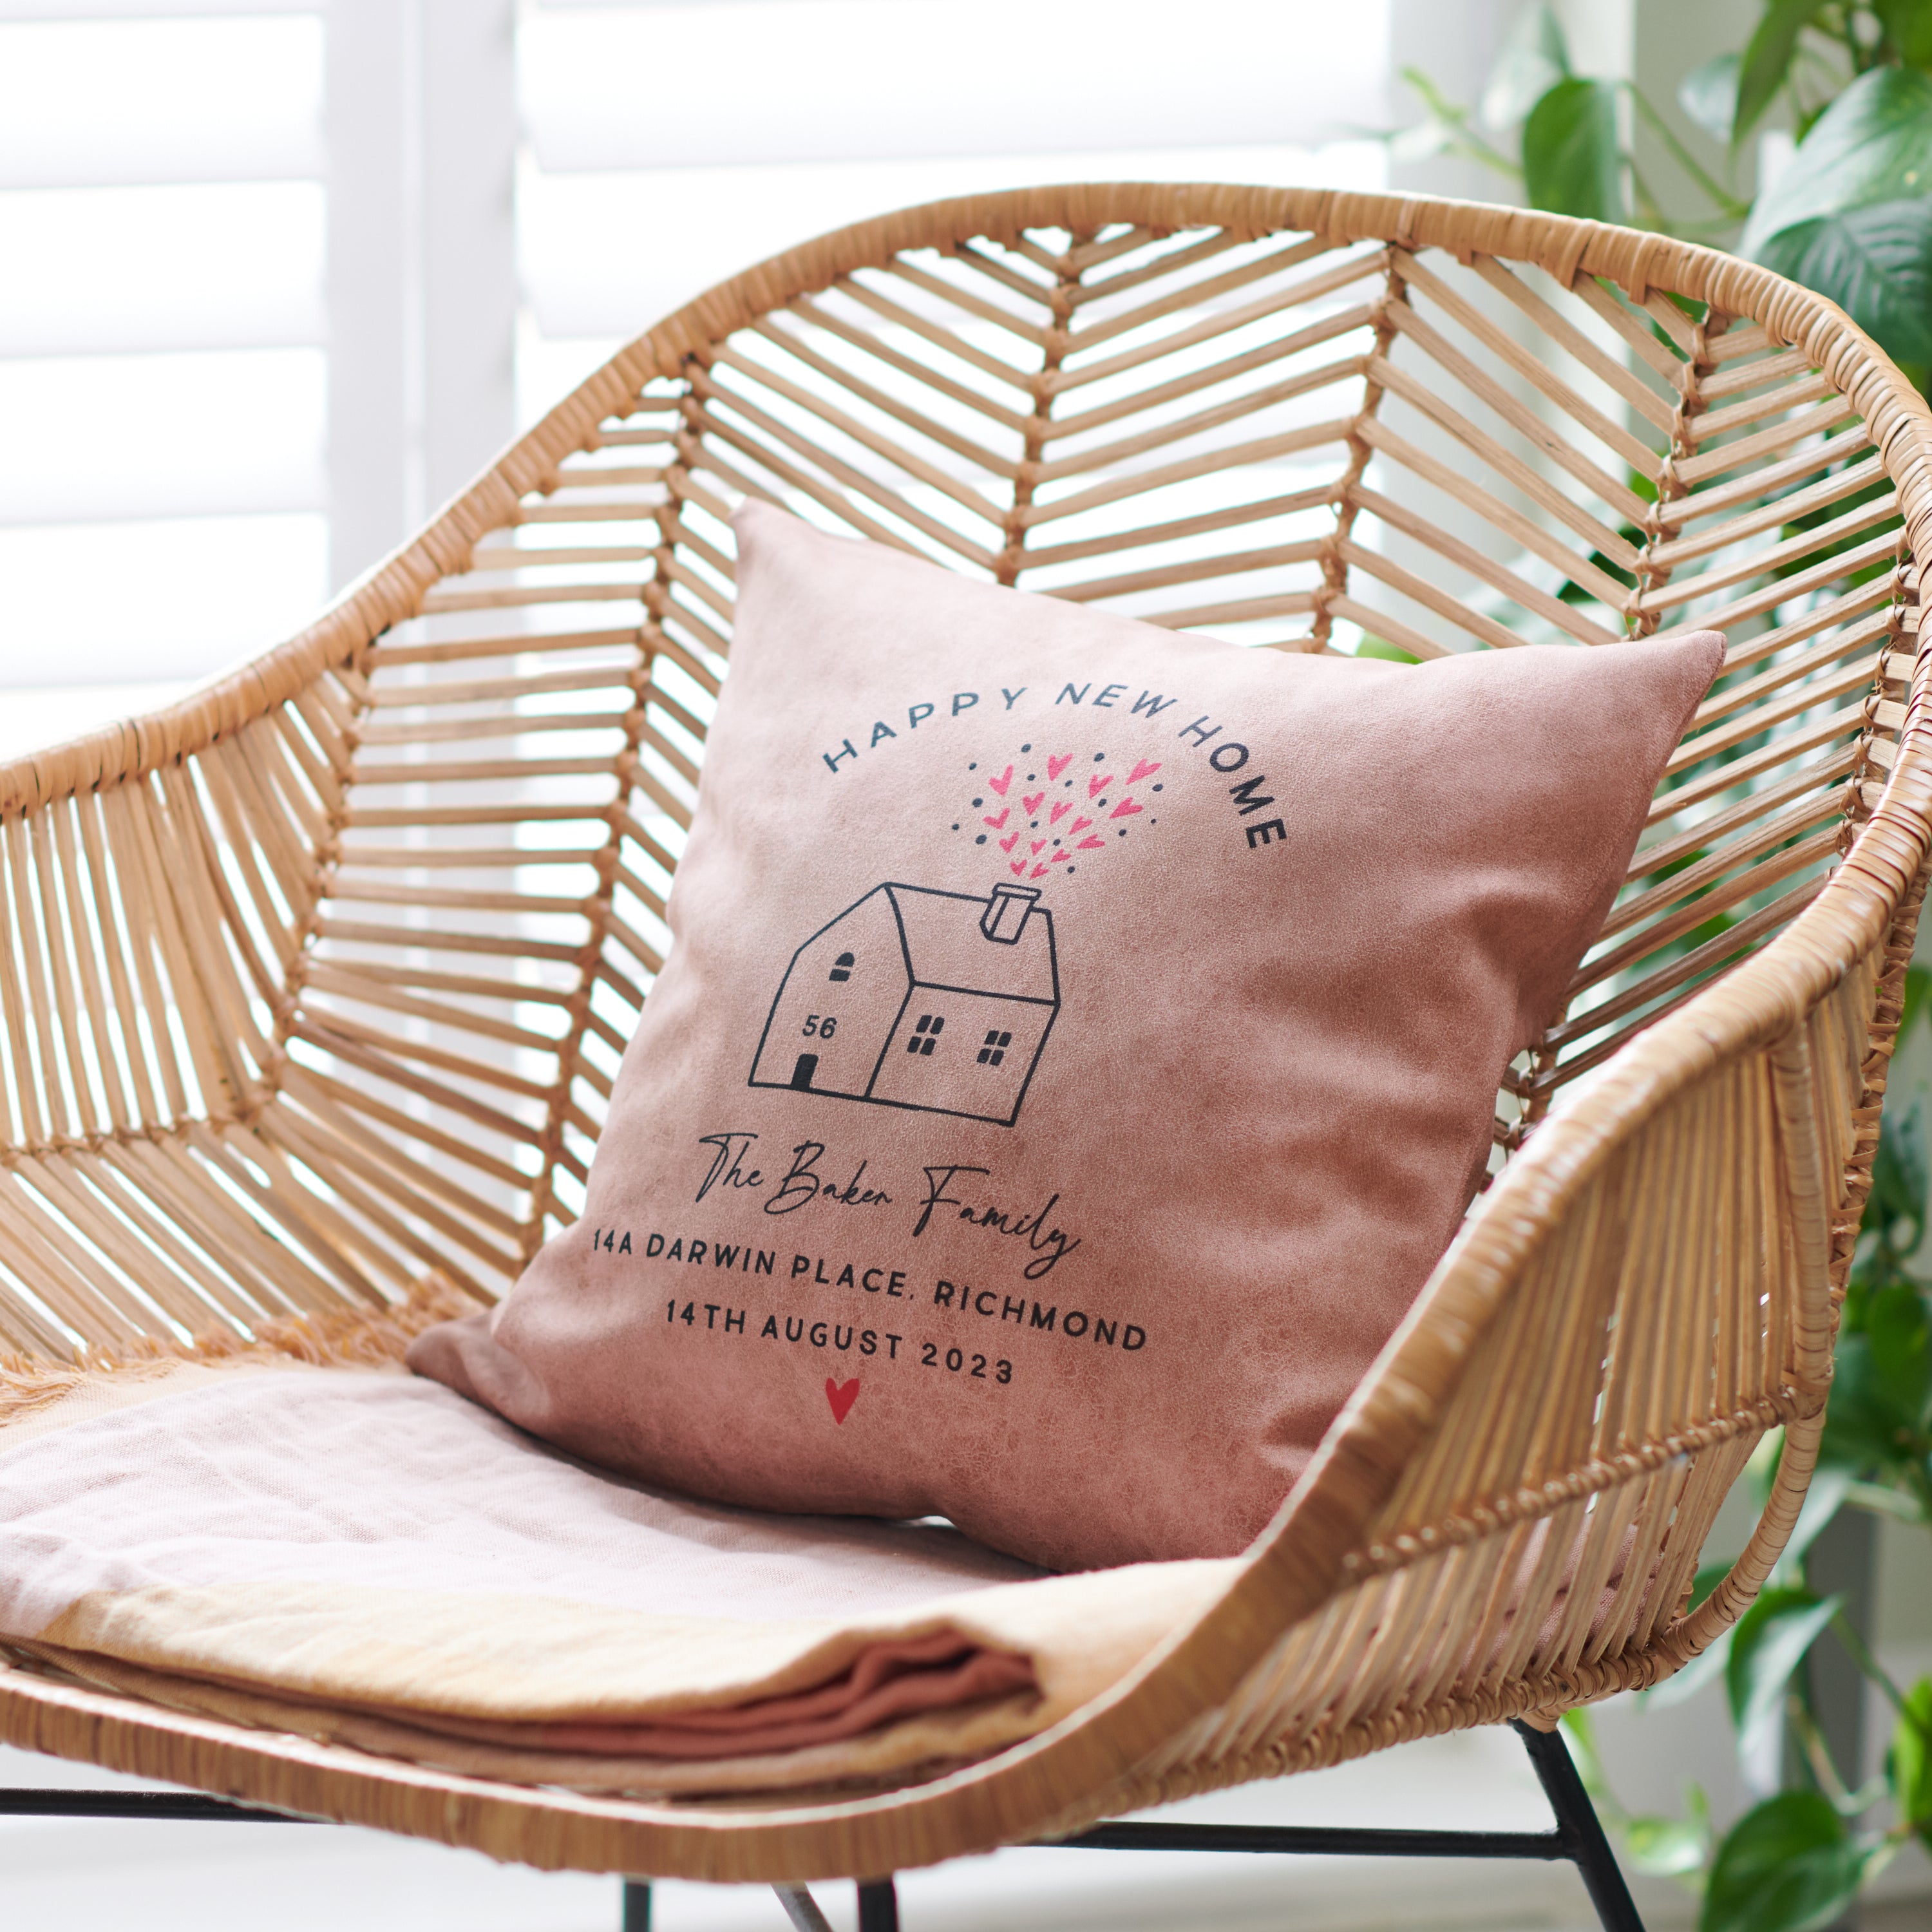 Oakdene Designs Cushions Personalised 'Happy New Home' Cushion